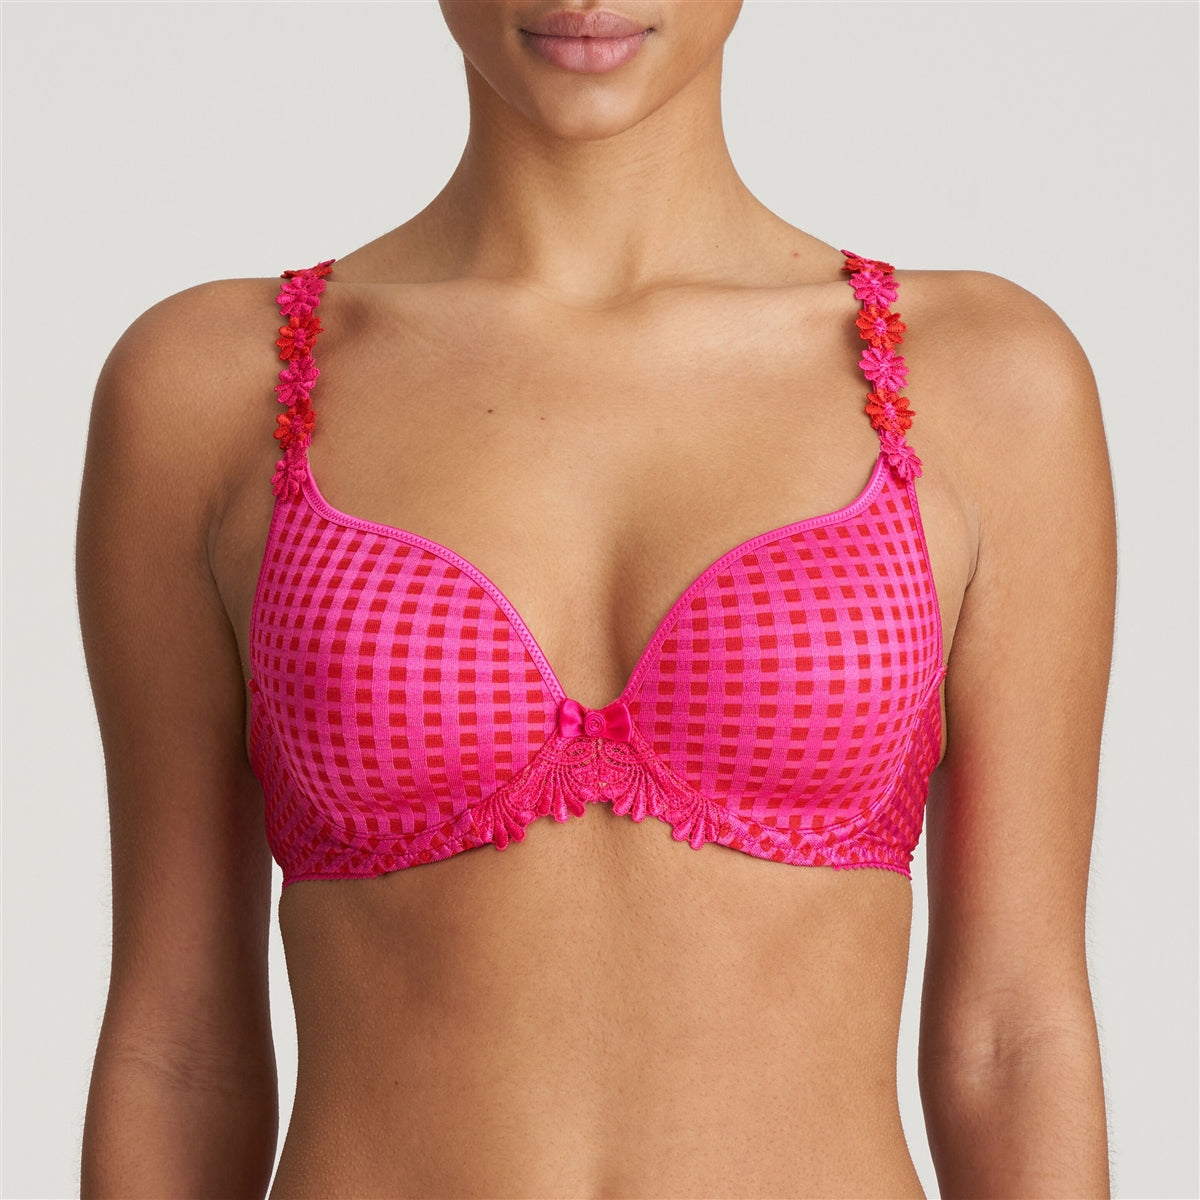 Preformed padded bra with heart-shaped cups in electric pink. The straps can be worn over the shoulders or around the neck and the straight back with silicone band provides extra support.